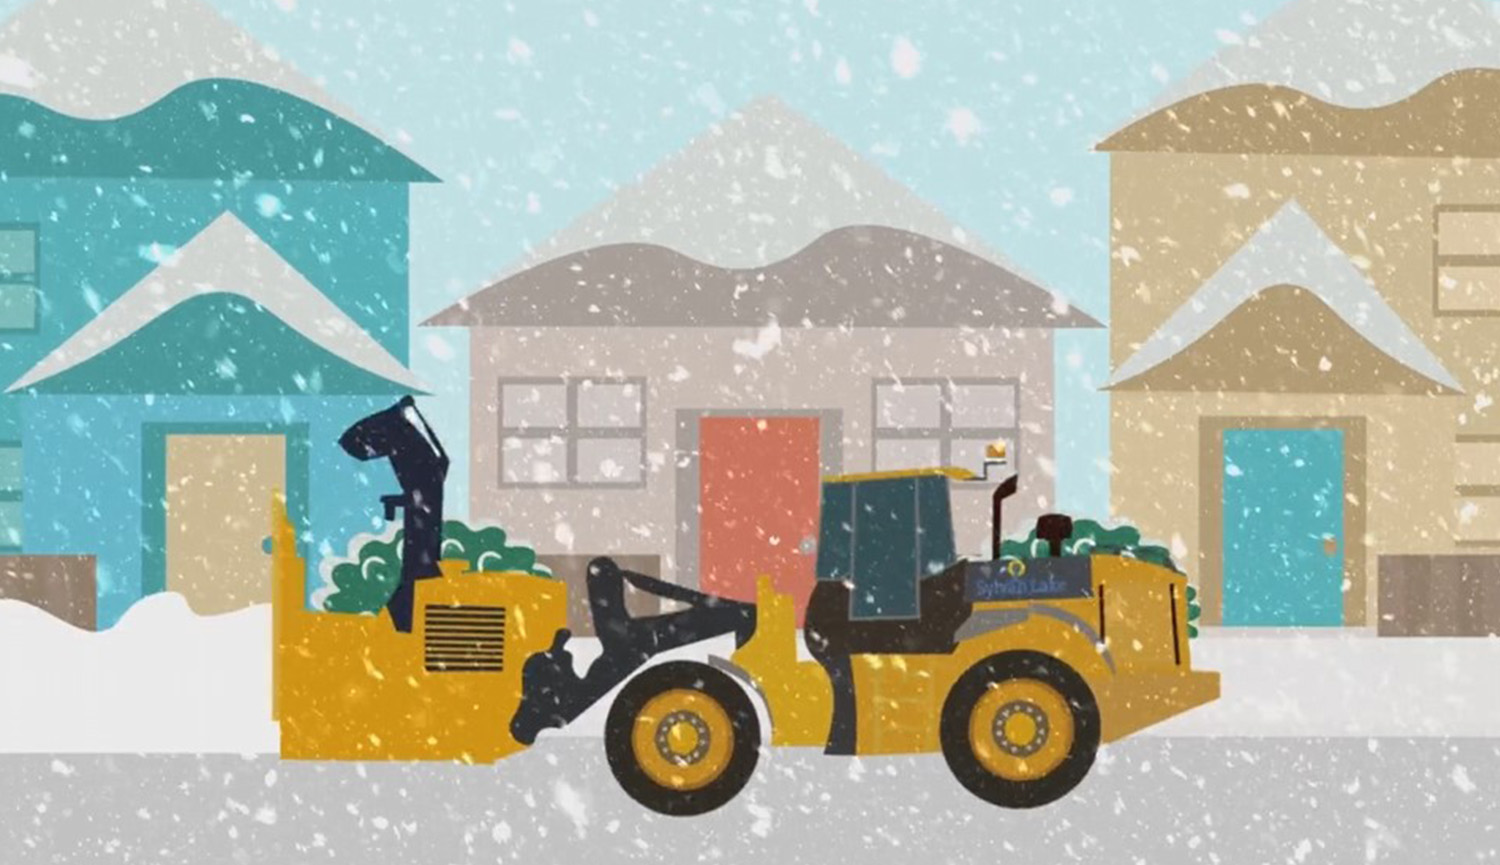 2D animation of Snow Remover on residential street